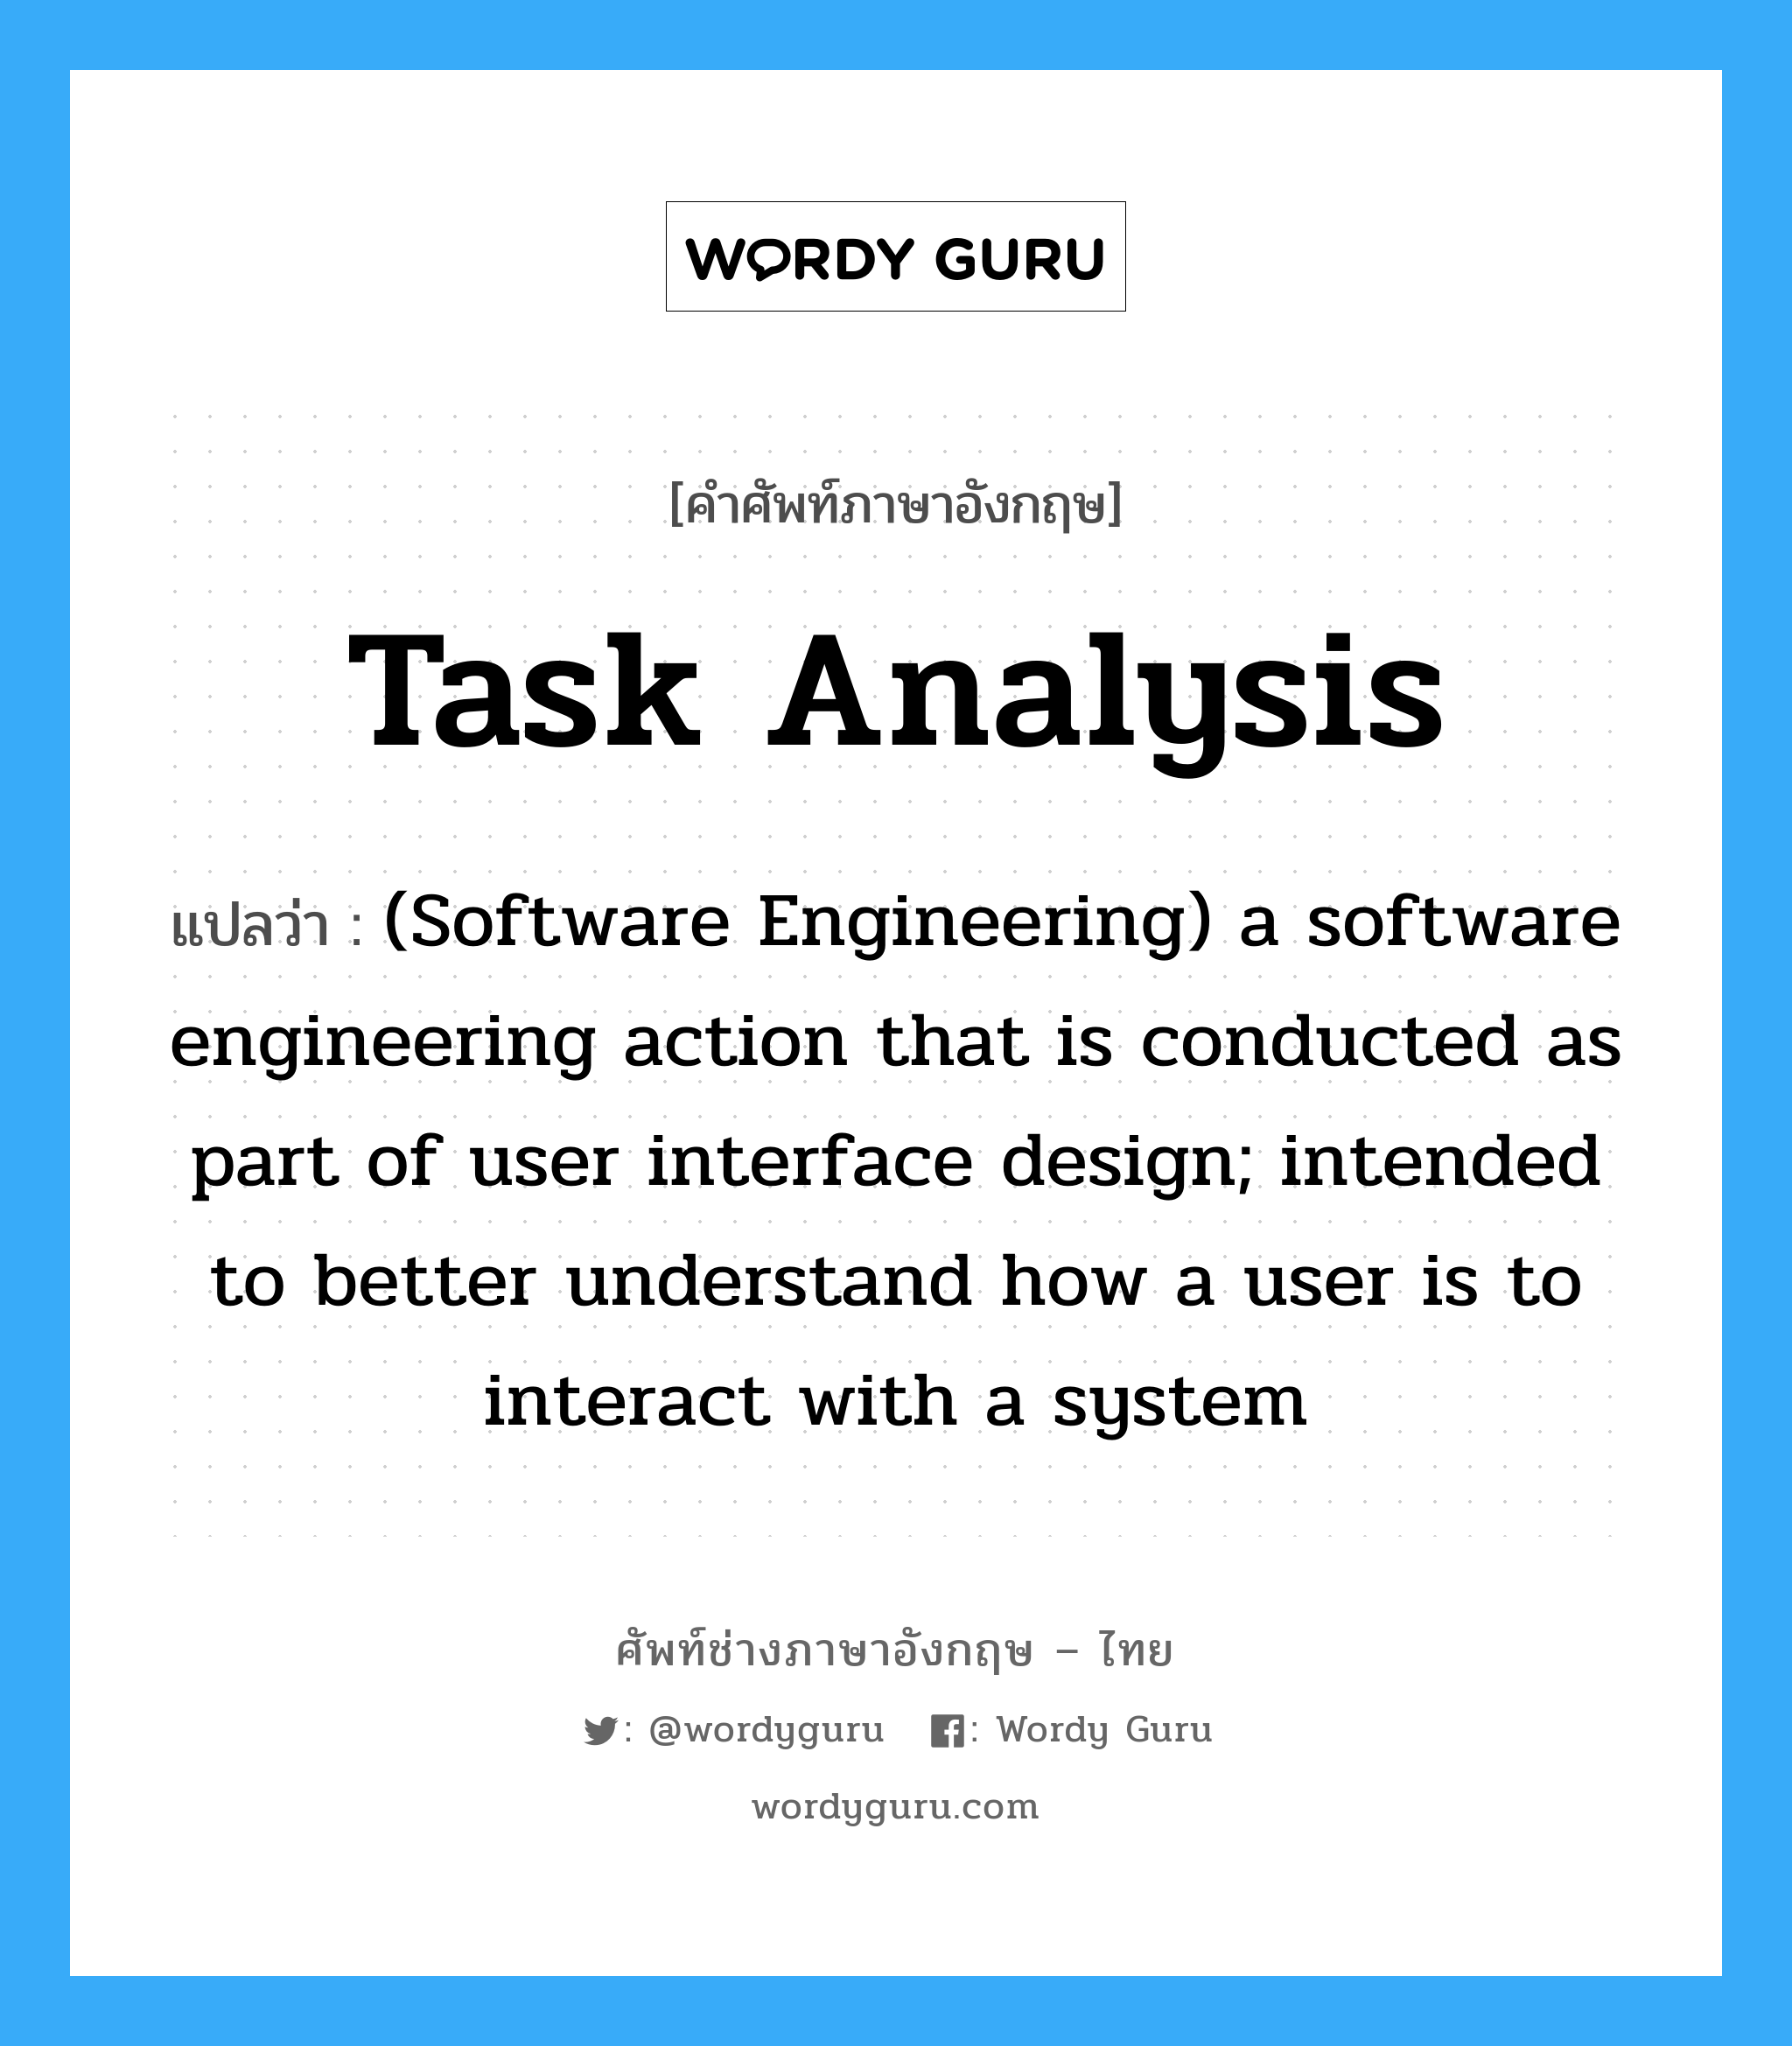 Task analysis แปลว่า?, คำศัพท์ช่างภาษาอังกฤษ - ไทย Task analysis คำศัพท์ภาษาอังกฤษ Task analysis แปลว่า (Software Engineering) a software engineering action that is conducted as part of user interface design; intended to better understand how a user is to interact with a system